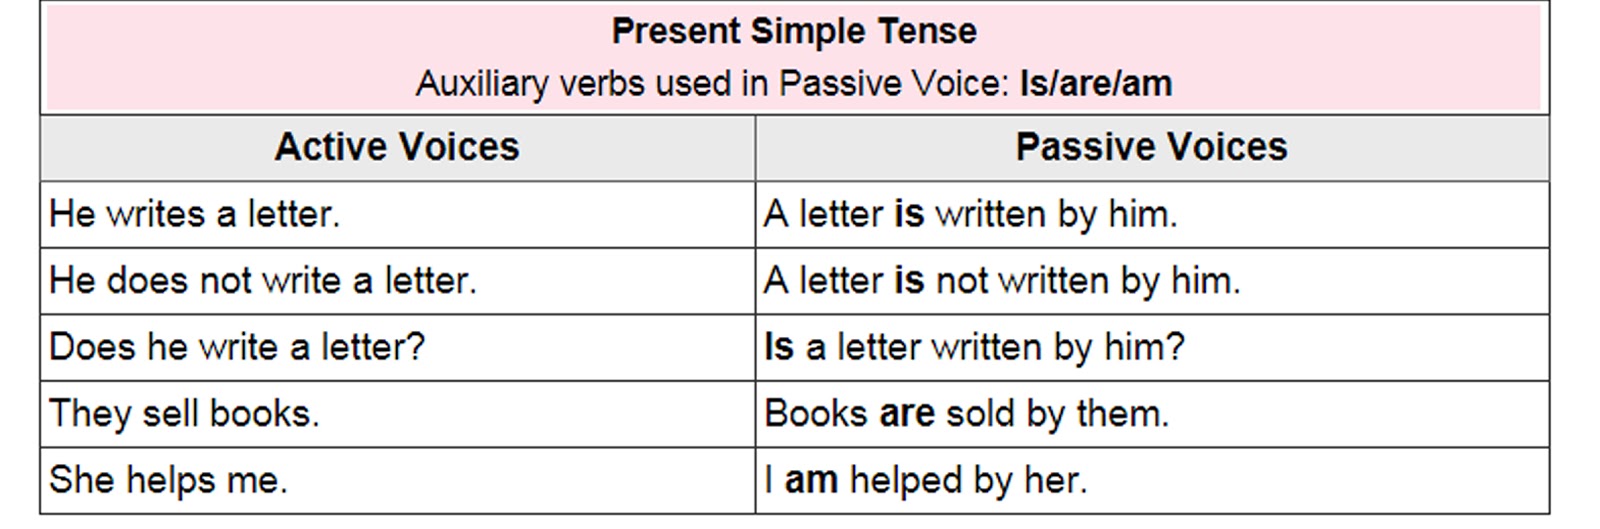 active-and-passive-voice-rules-simple-present-tense-english-grammar-a-to-z